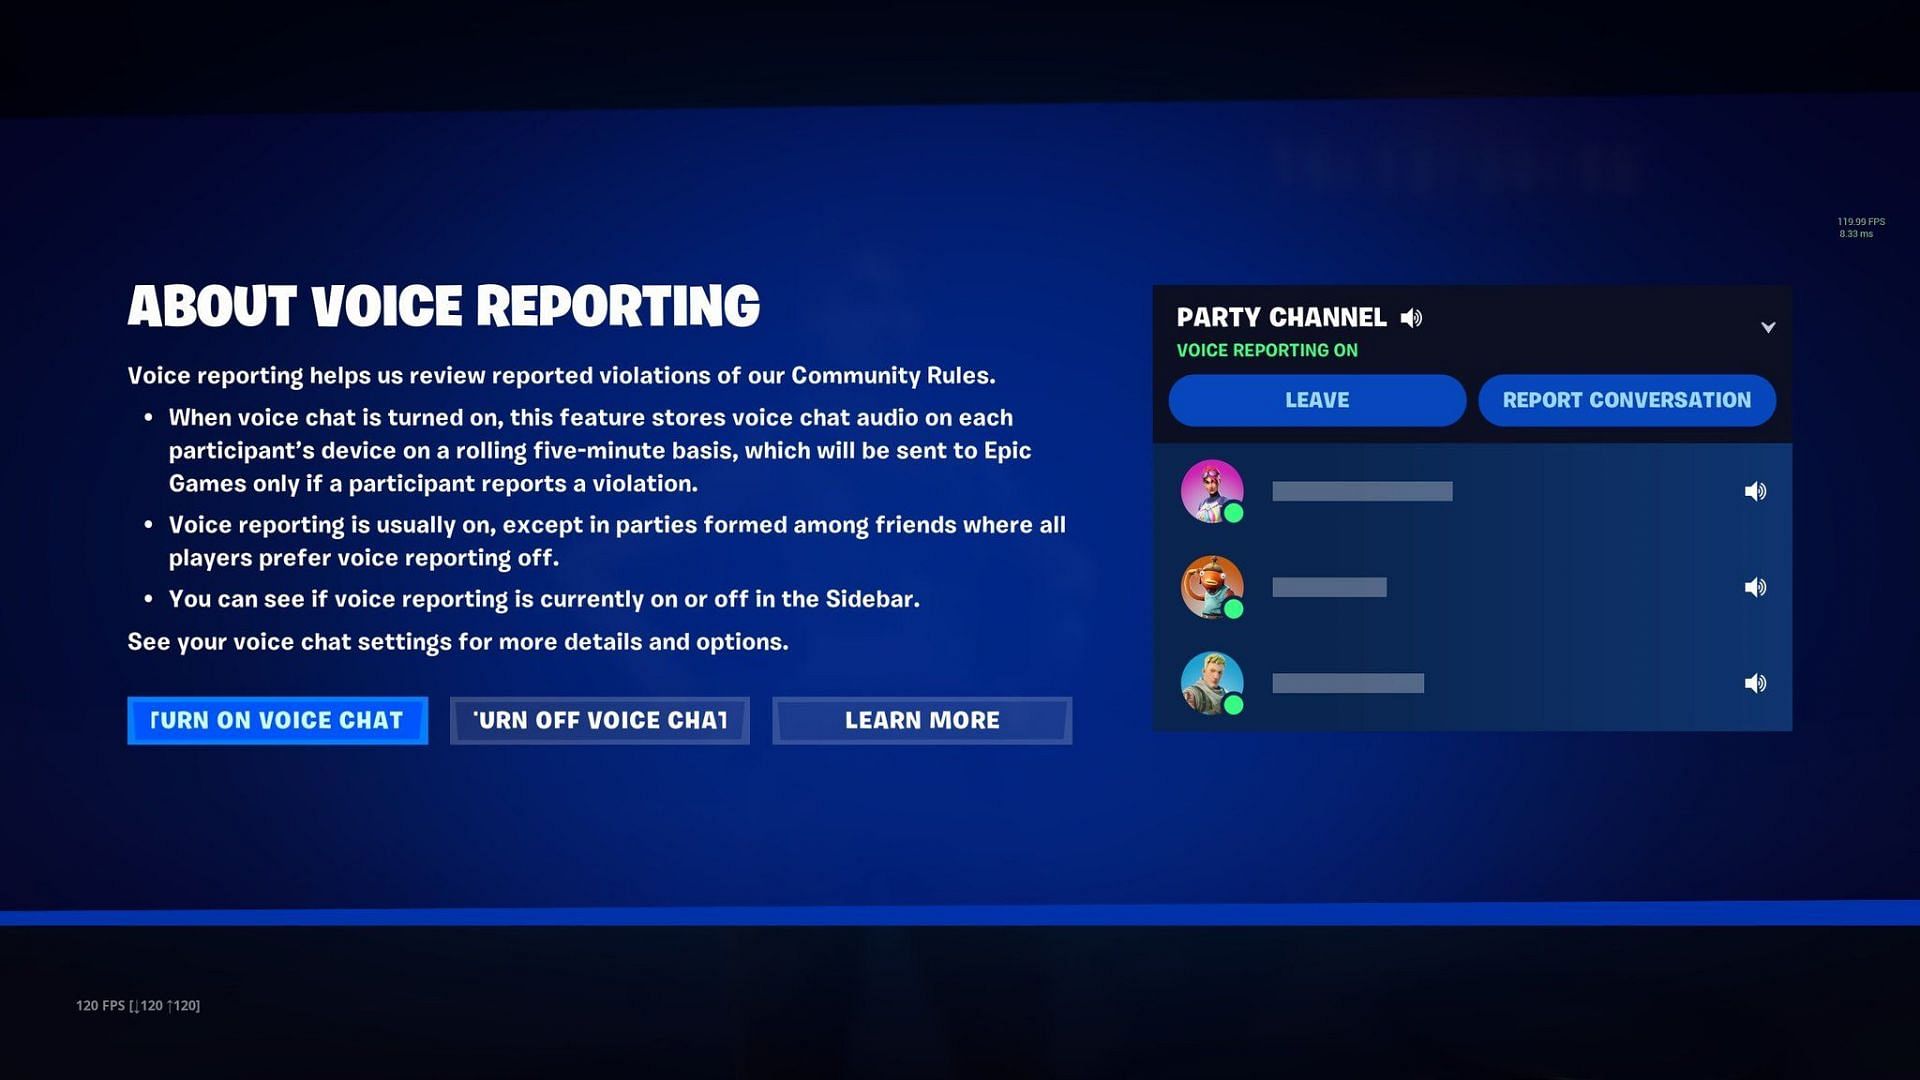 Fortnite voice chat reporting feature seemingly in development